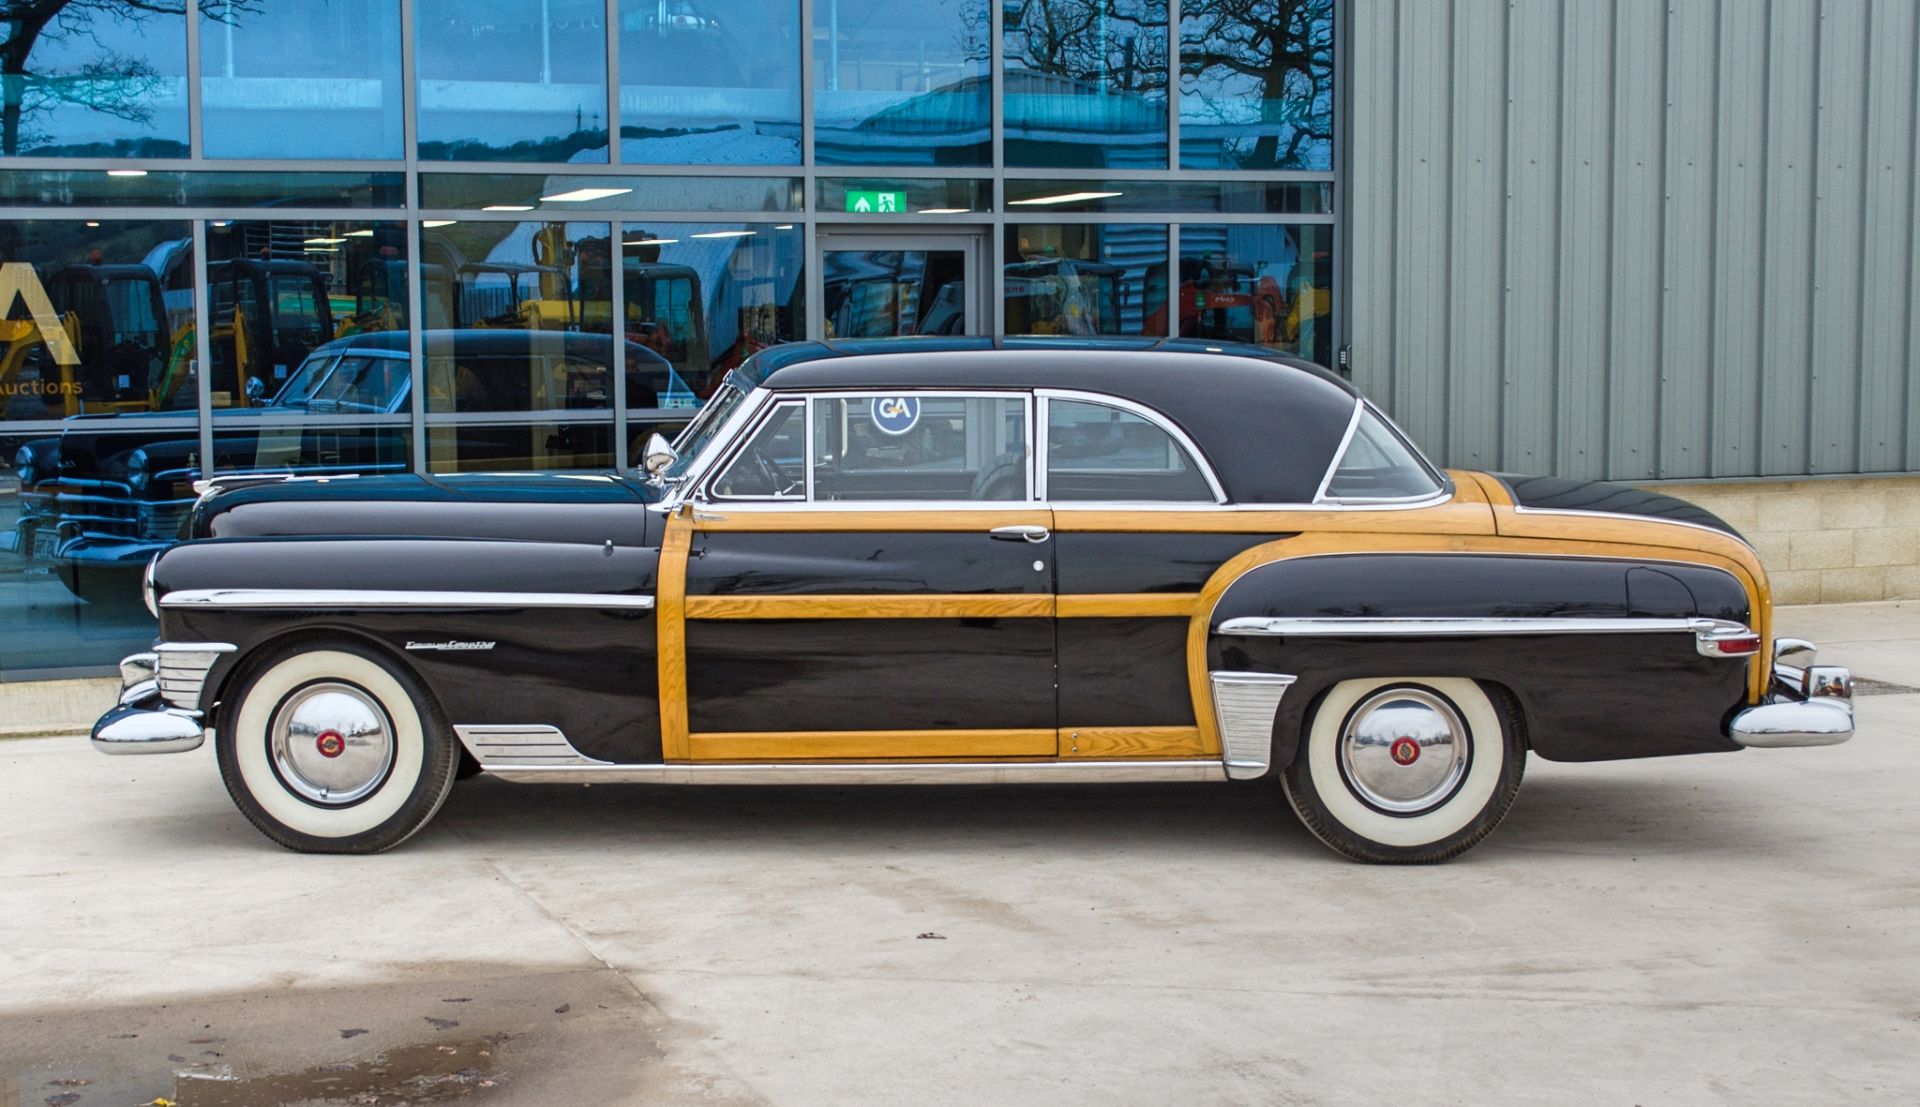 1950 Chrysler Newport Town and Country 5300cc 2 door Coupe - Image 16 of 62